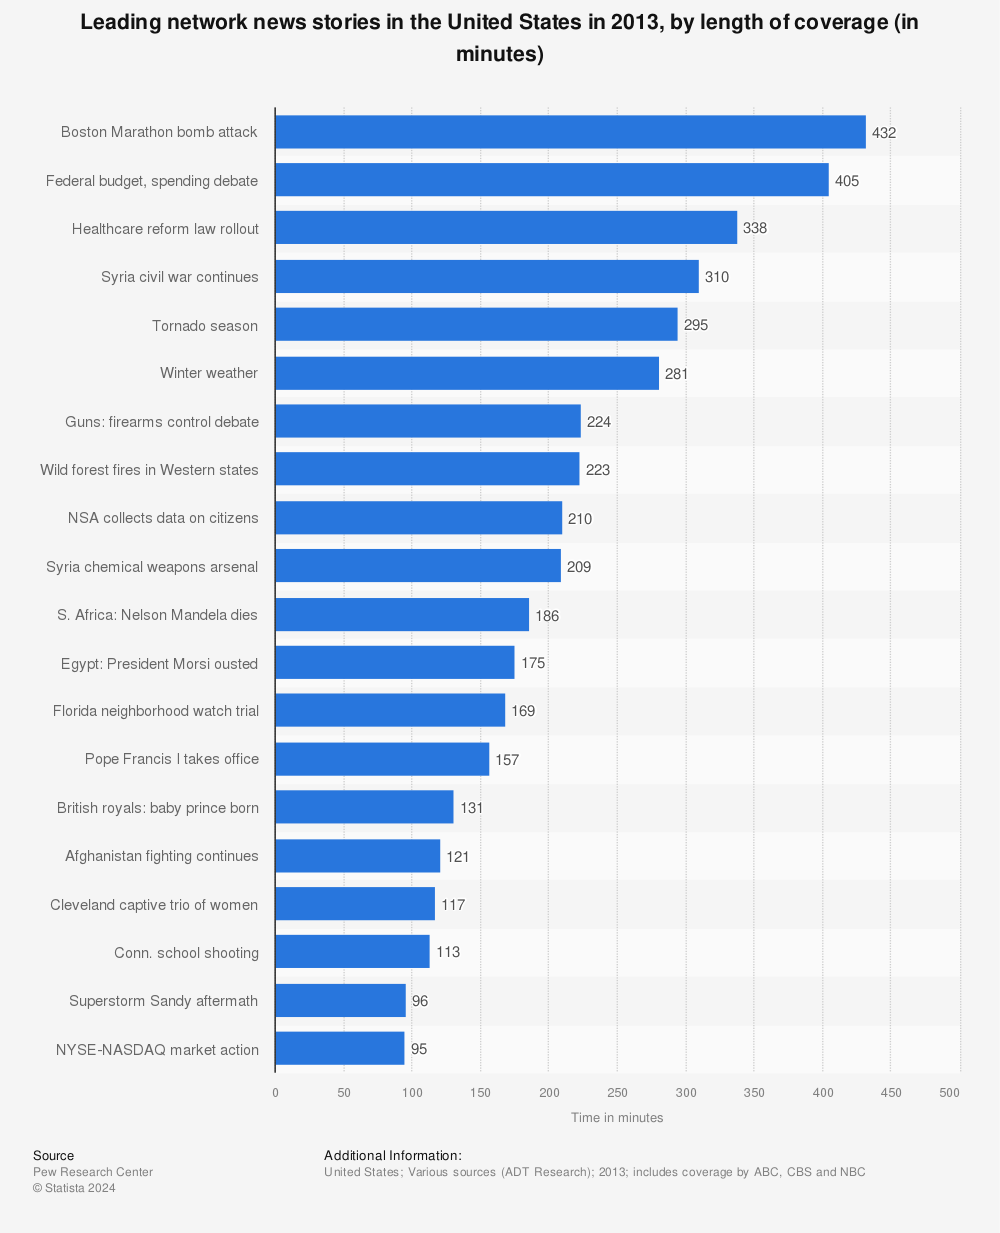 Statistic: Leading network news stories in the United States in 2013, by length of coverage (in minutes) | Statista